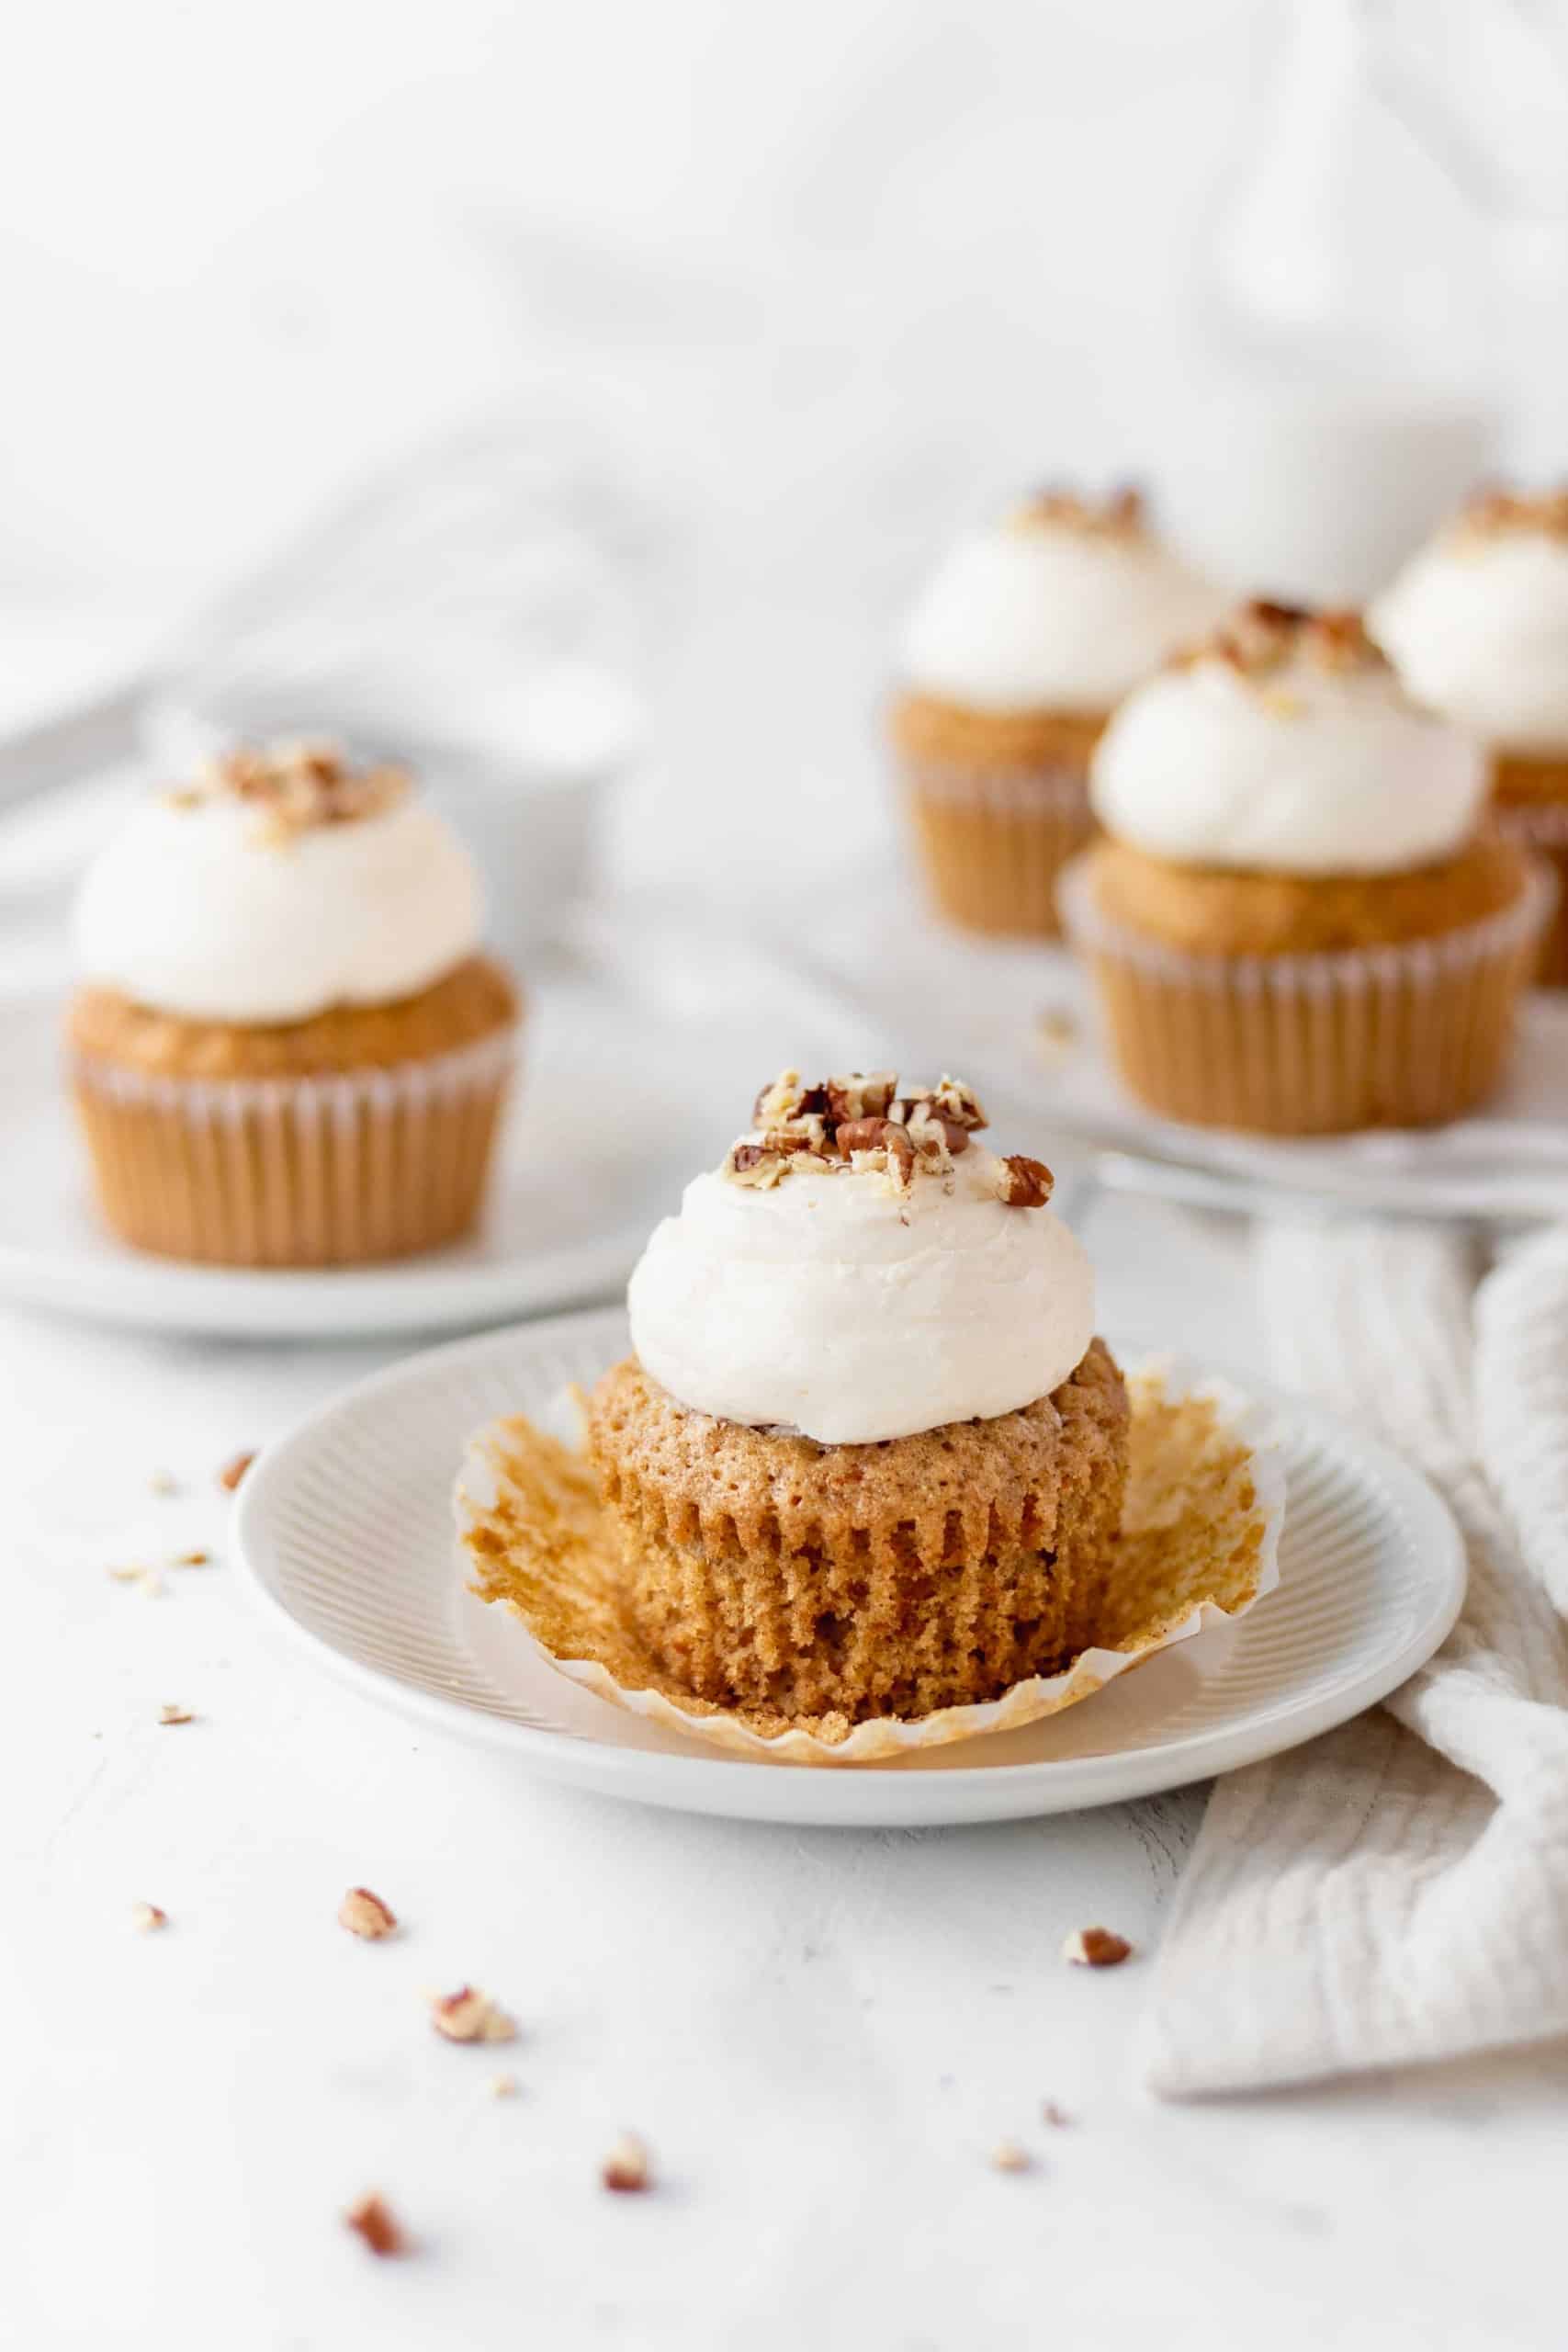 Carrot cake cupcake on a plate with the paper liner peeled